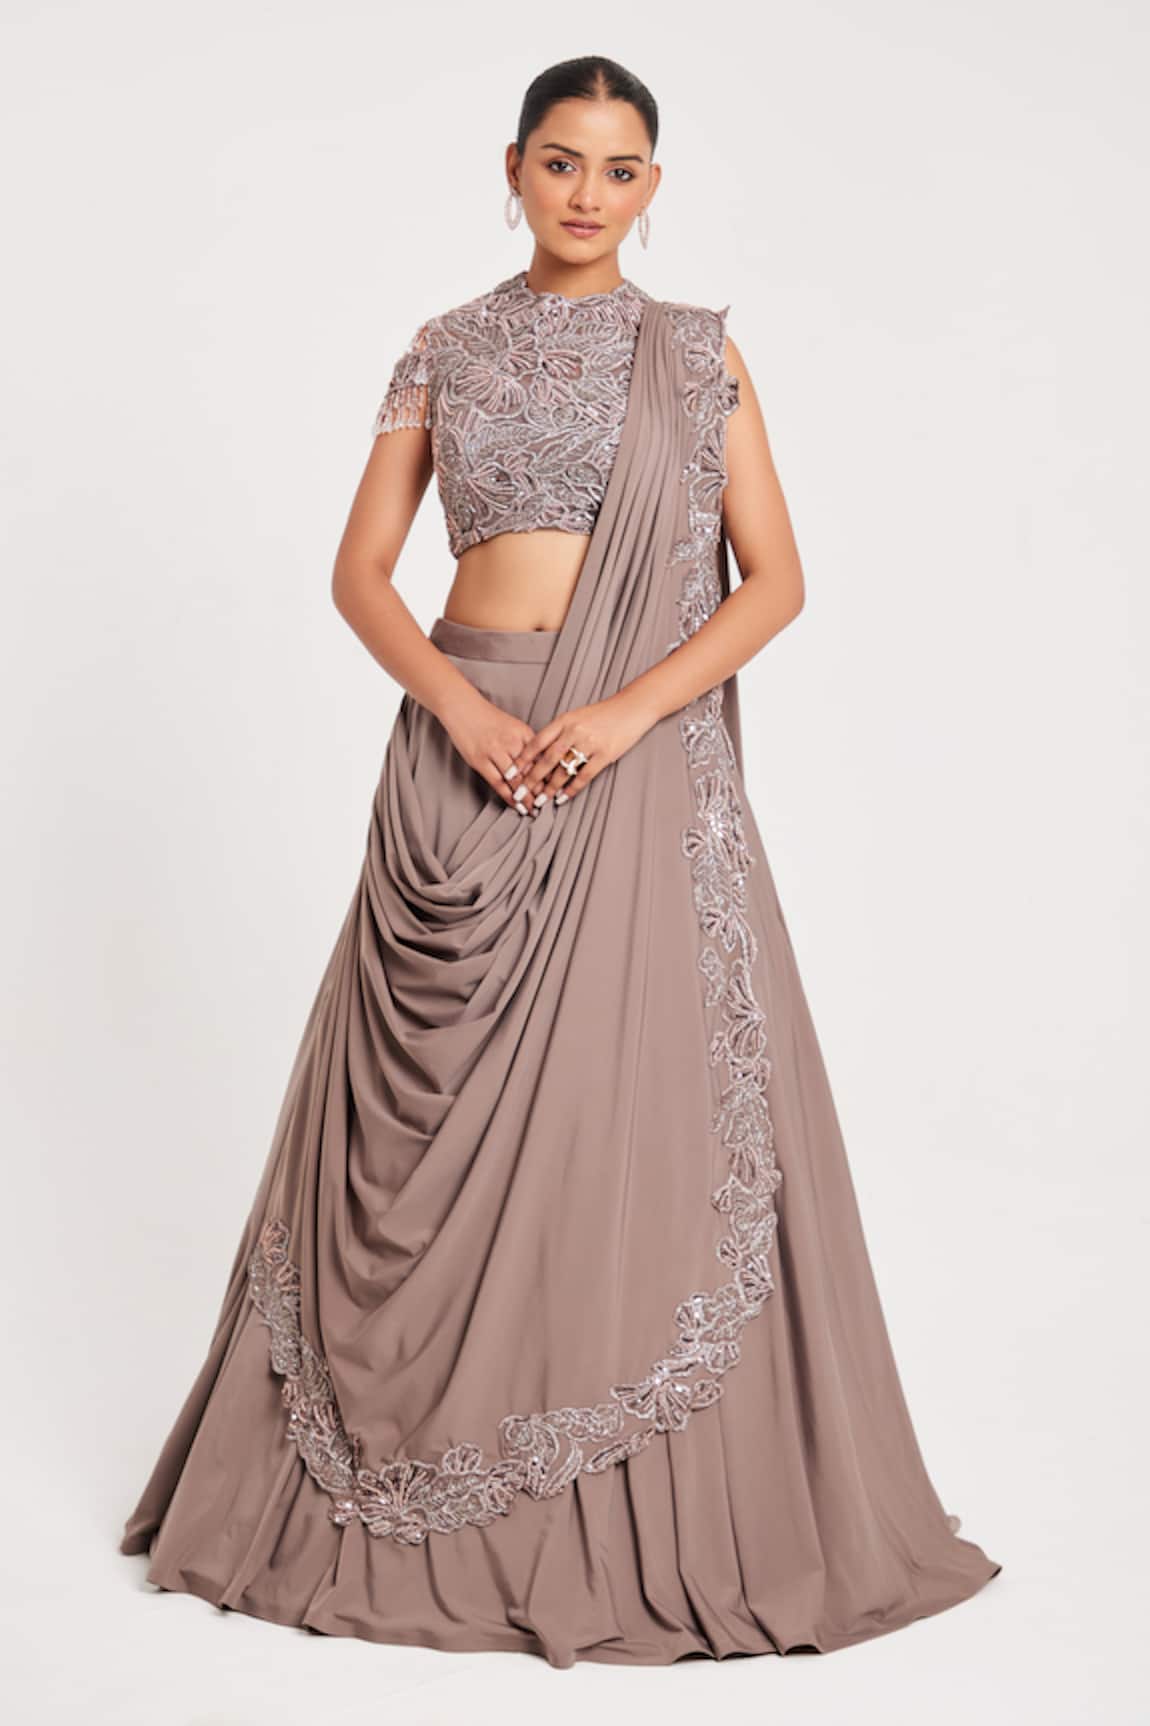 Chaashni by Maansi and Ketan Floral Embroidered Border Draped Lehenga With Embellished Blouse